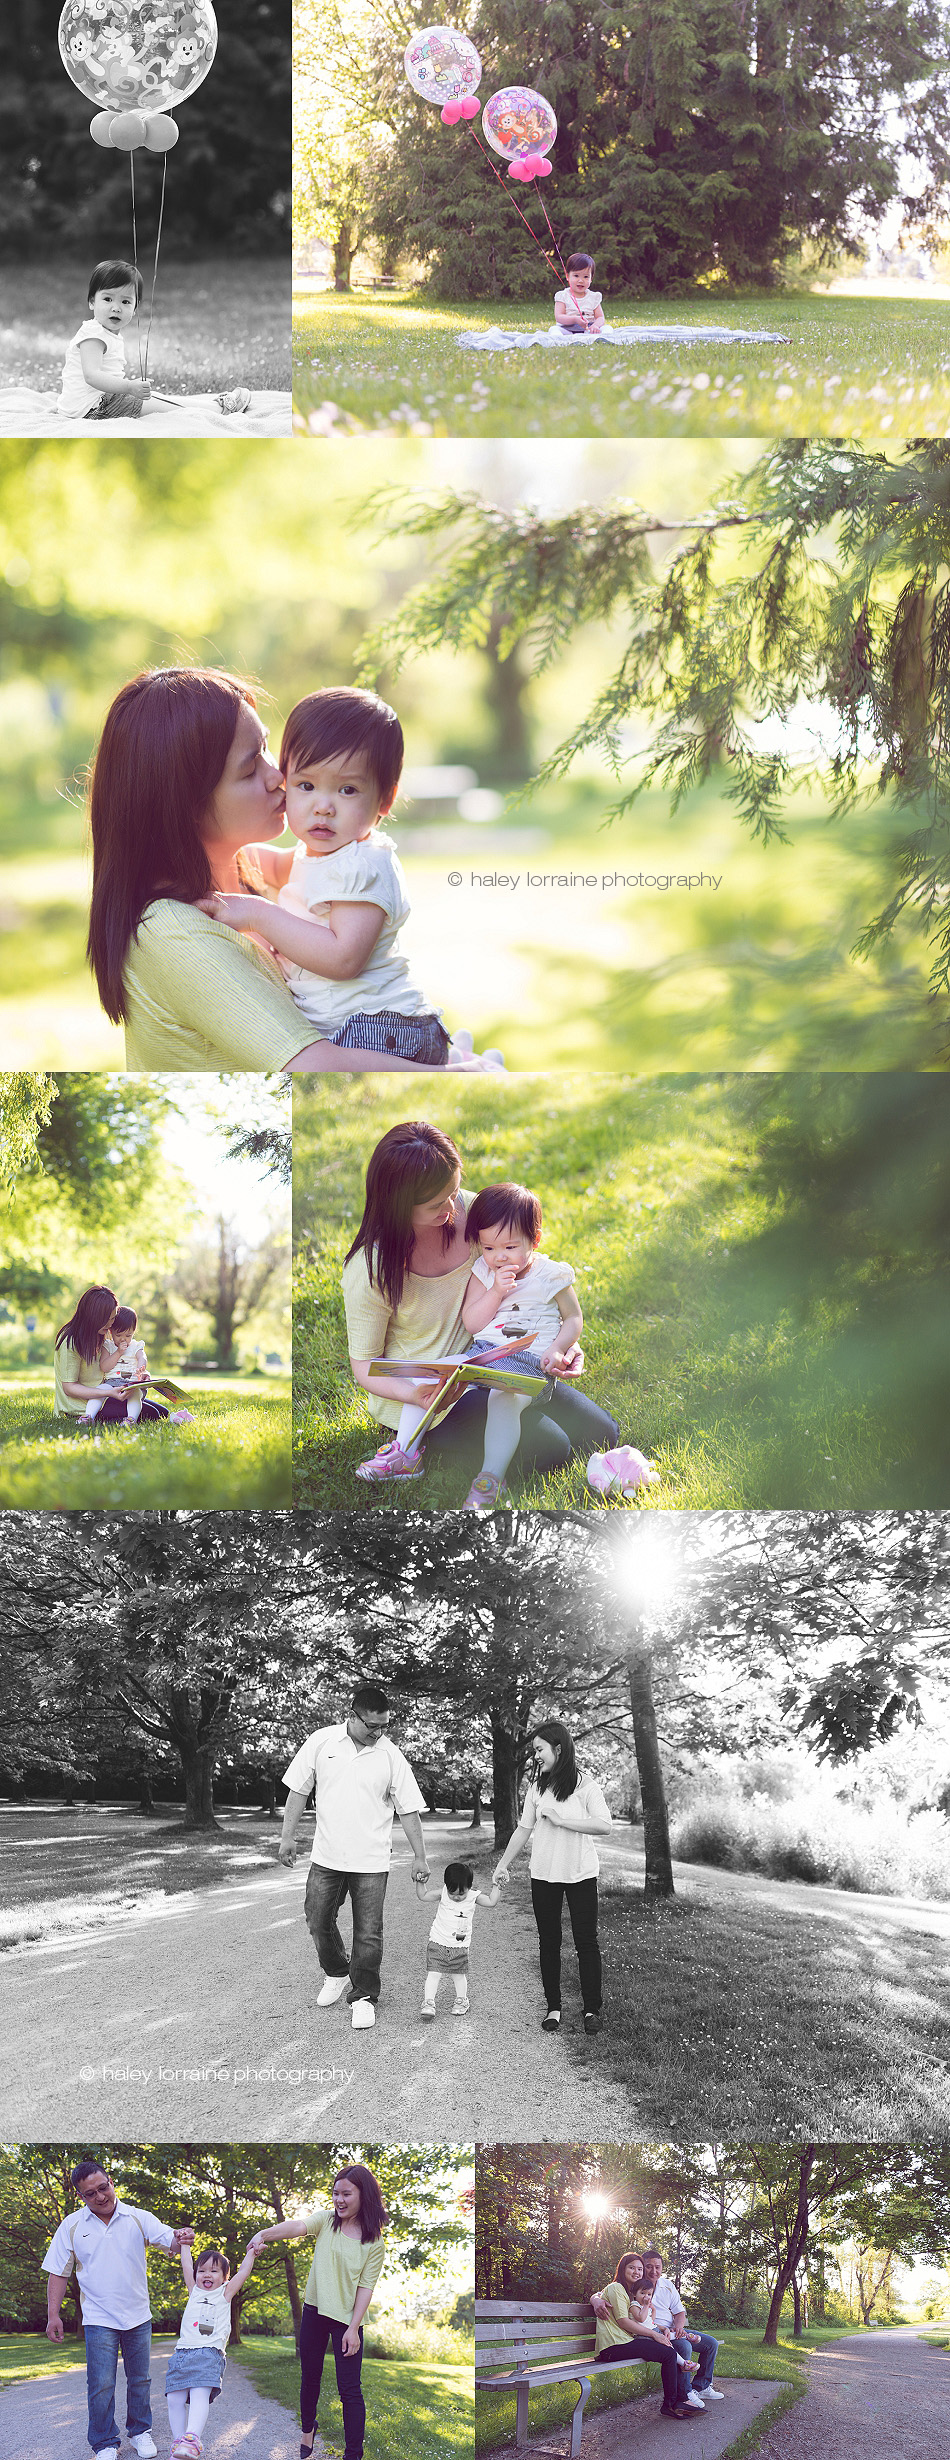 Playful Vancouver Family Photography